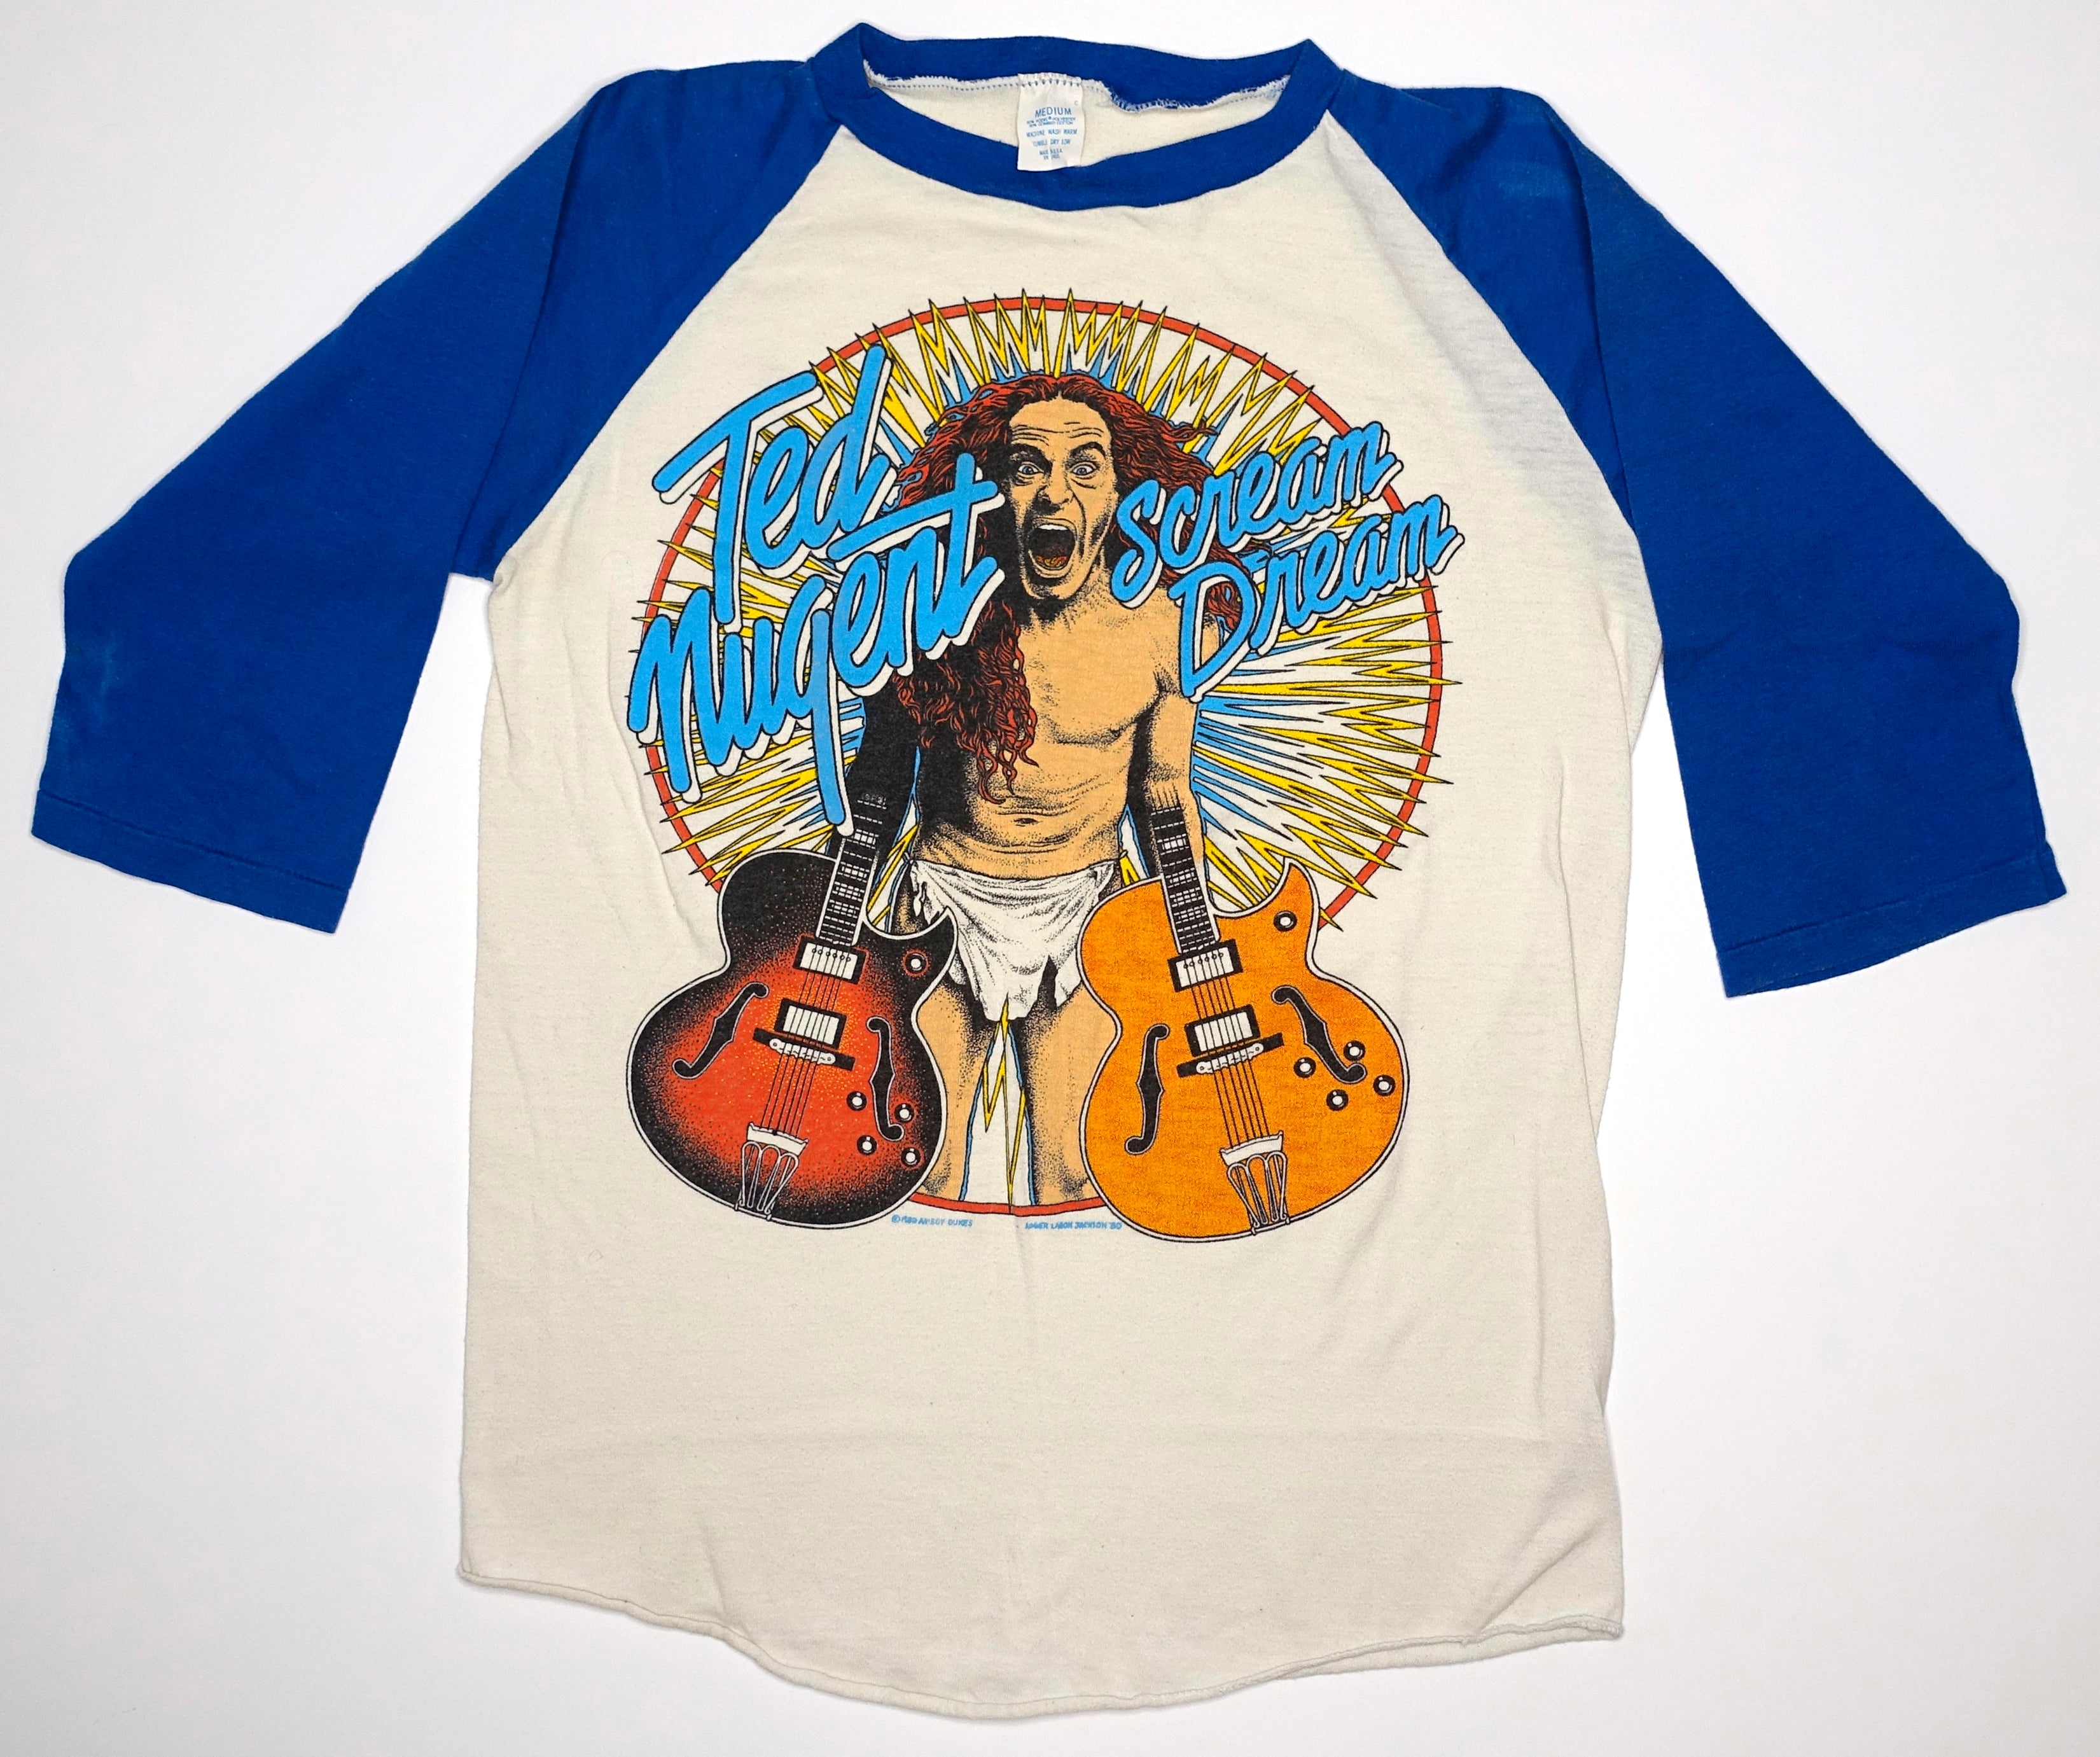 Ted Nugent ‎– Scream Dream 1980 Tour Jersey / Shirt Size Small